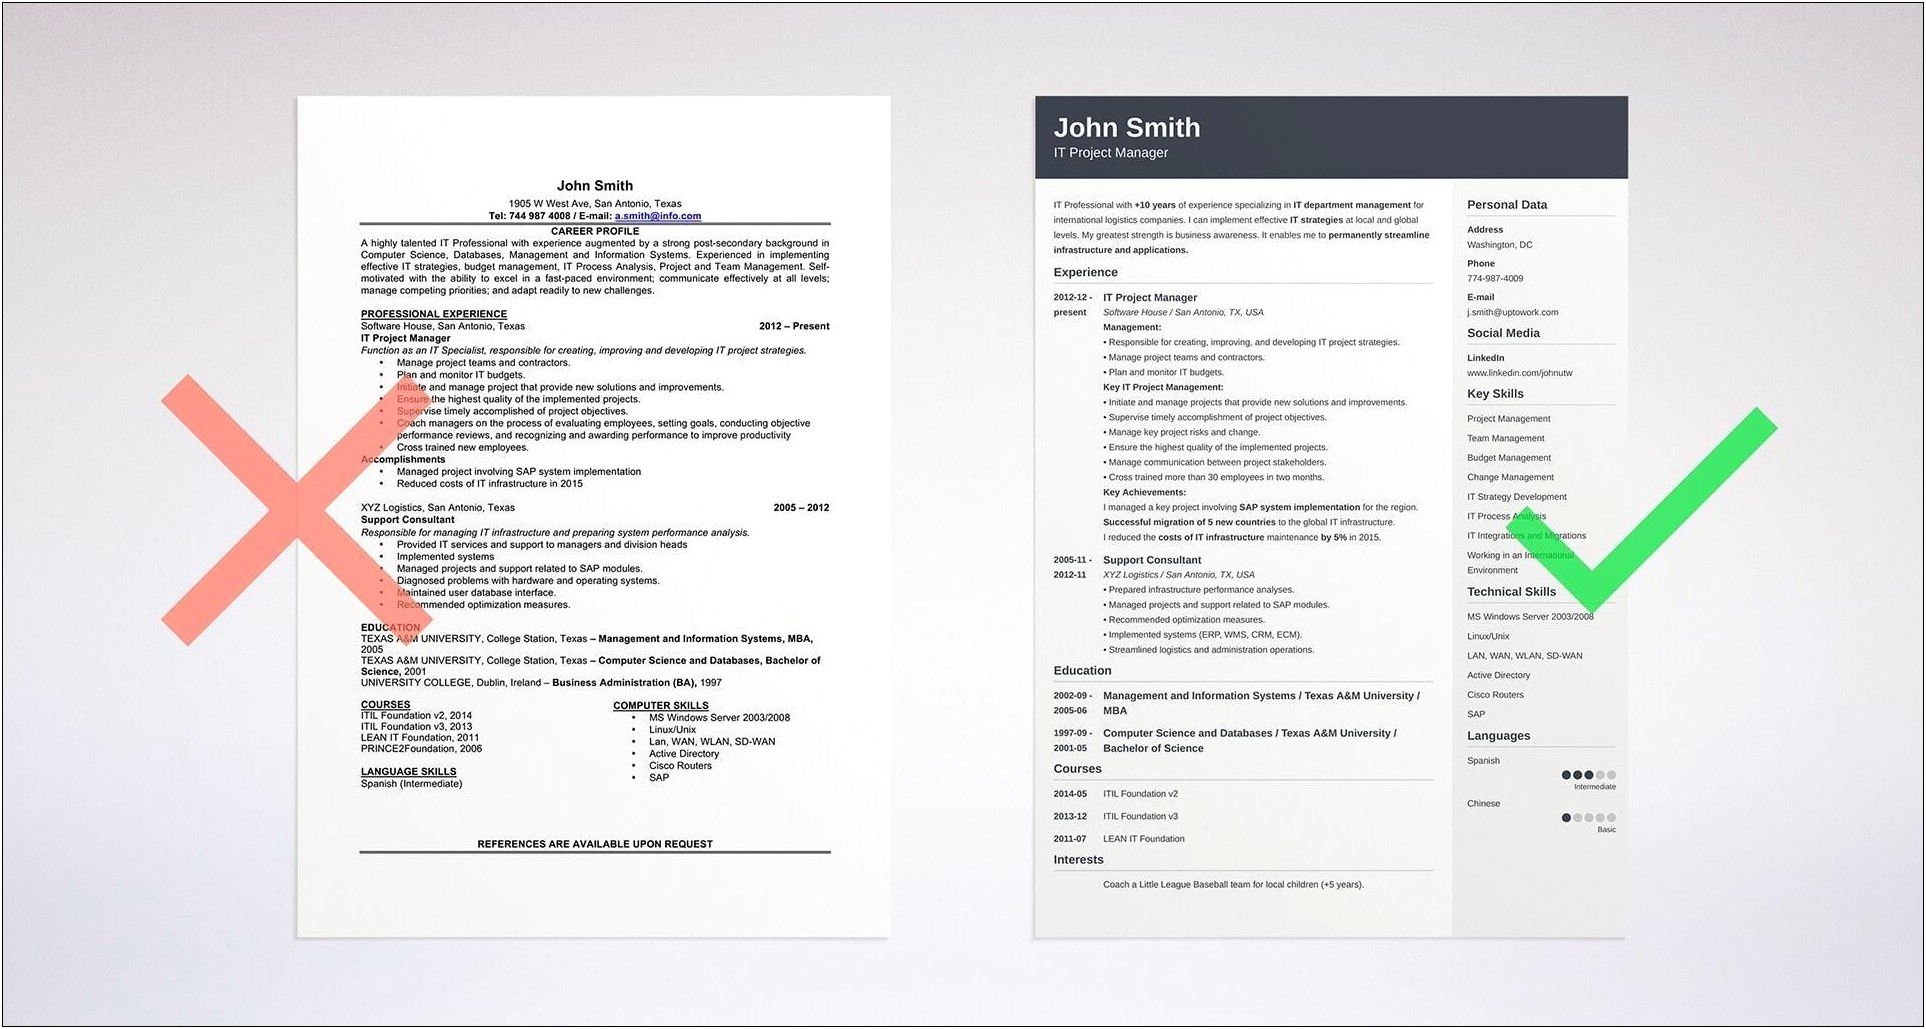 Do People Still Put Objectives On Resumes